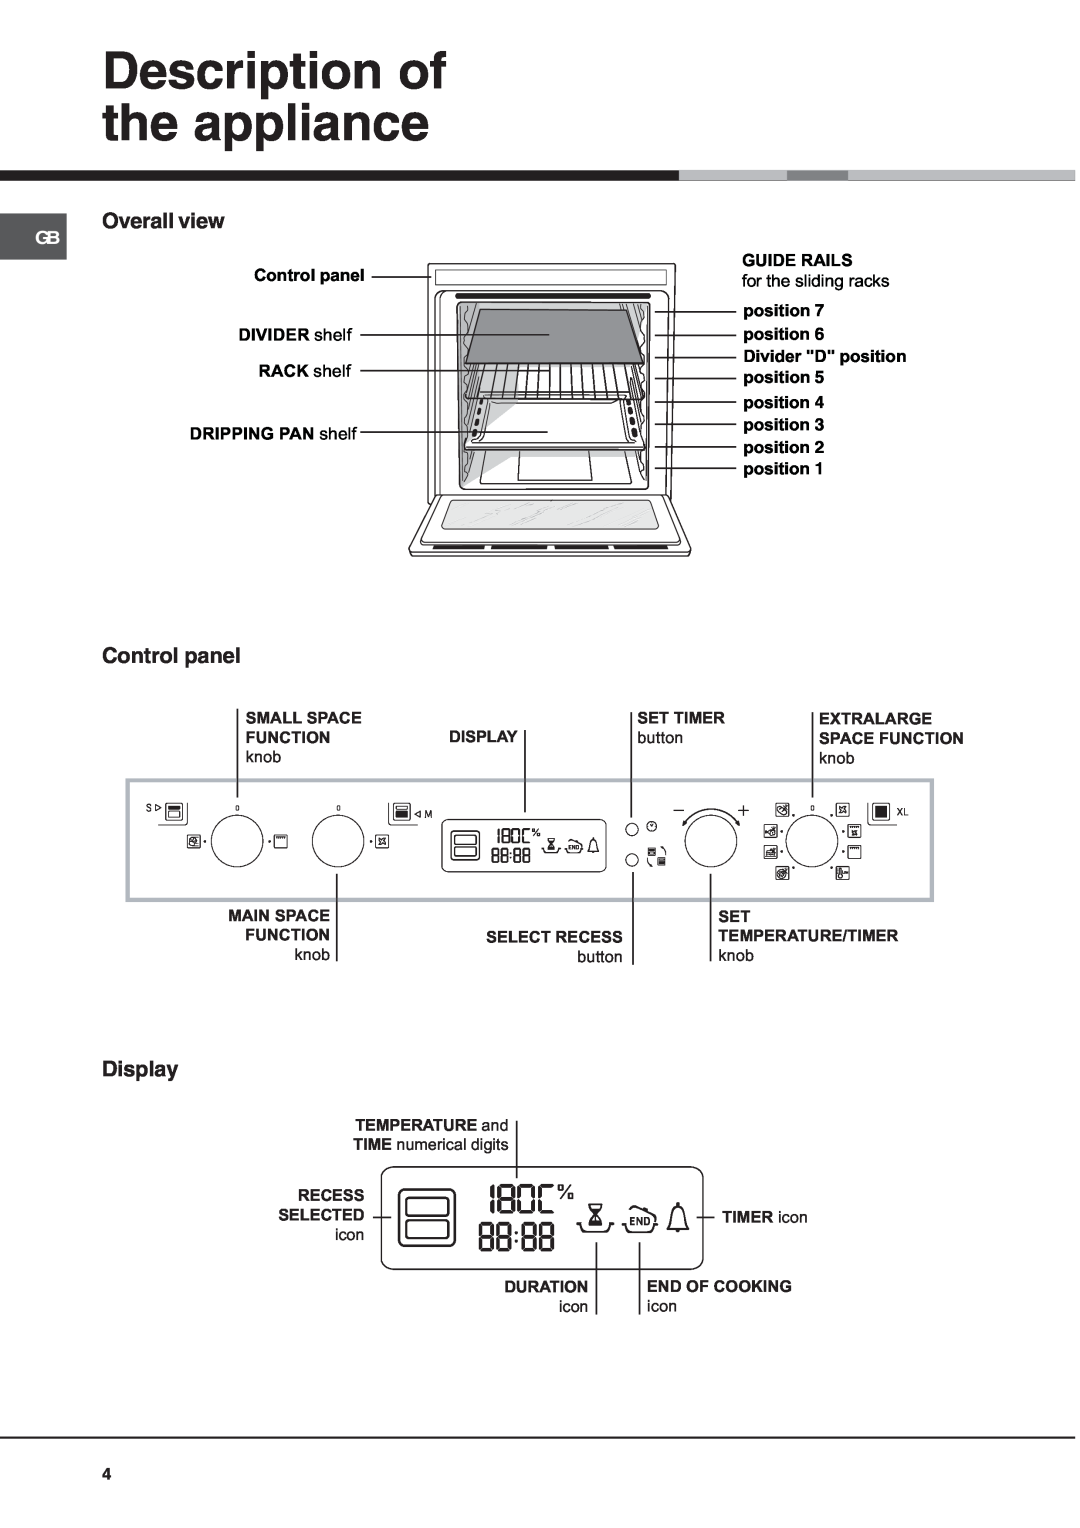 Hotpoint OS 897D HP, OS 897D C IX, OS 897D IX manual Description of the appliance, Overall view, Control panel, Display 